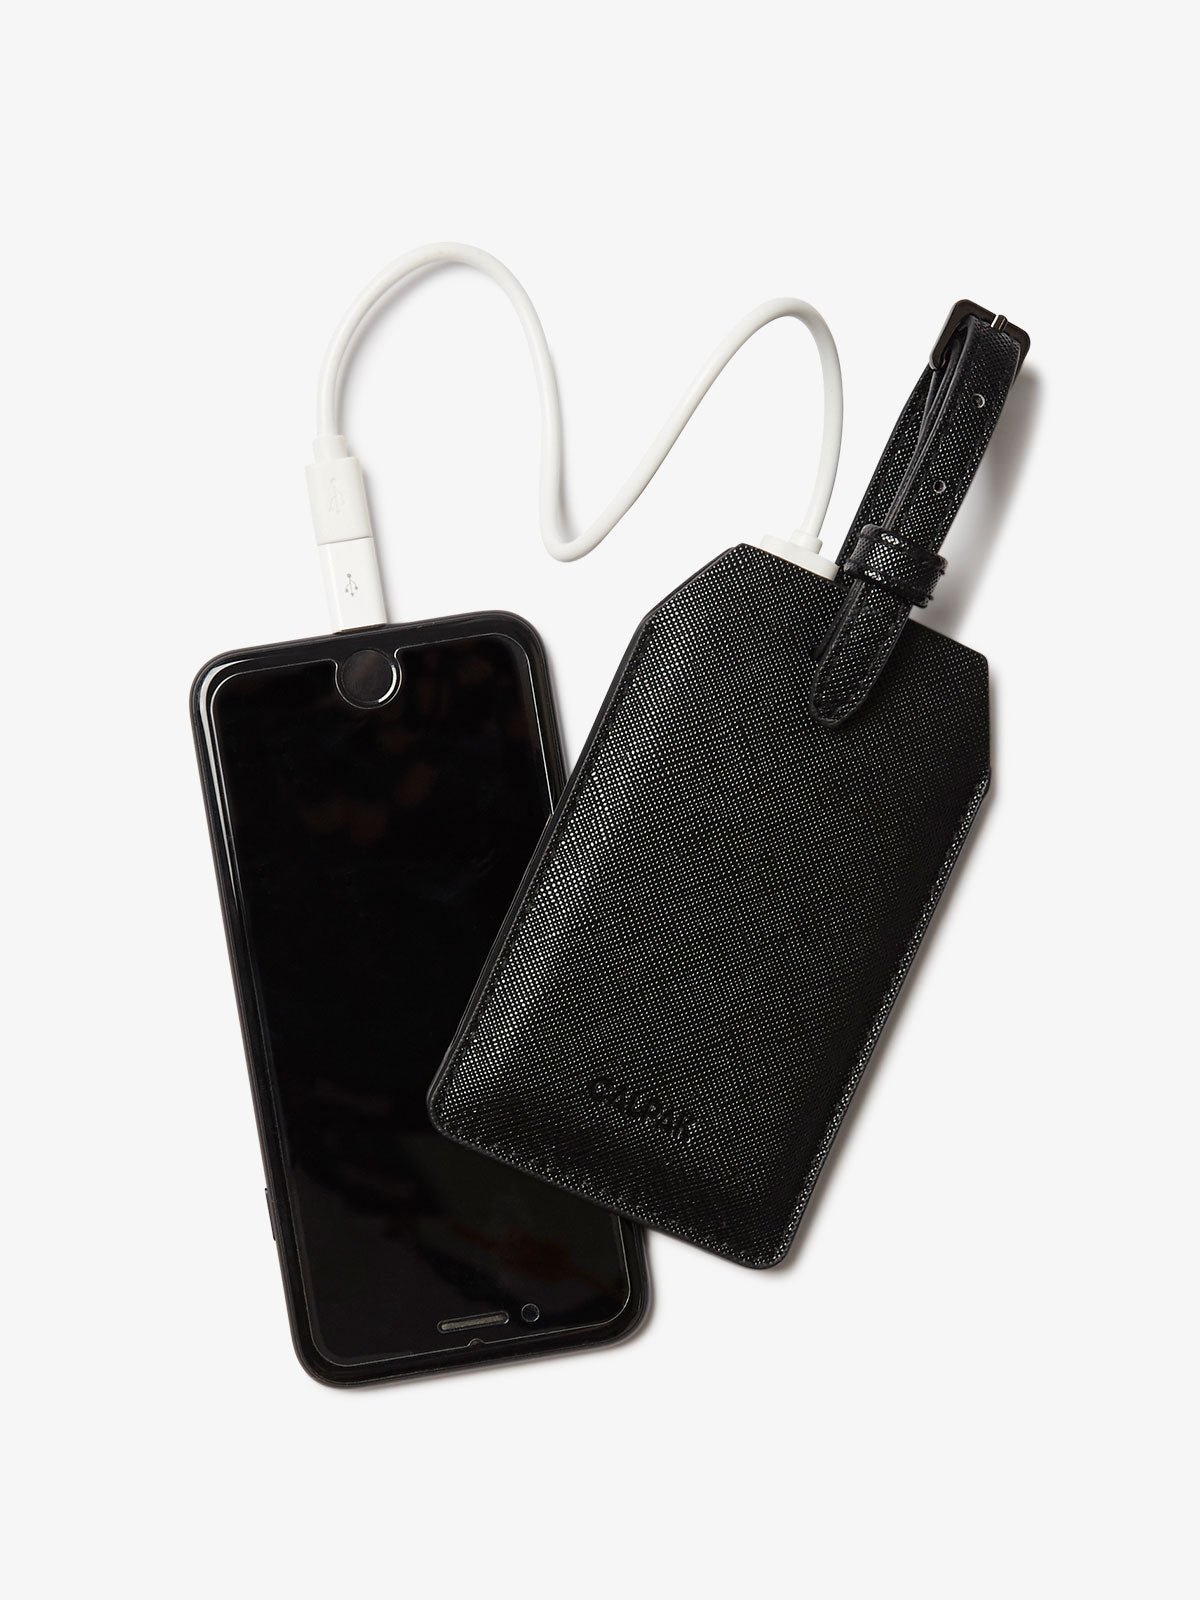 portable charger in black